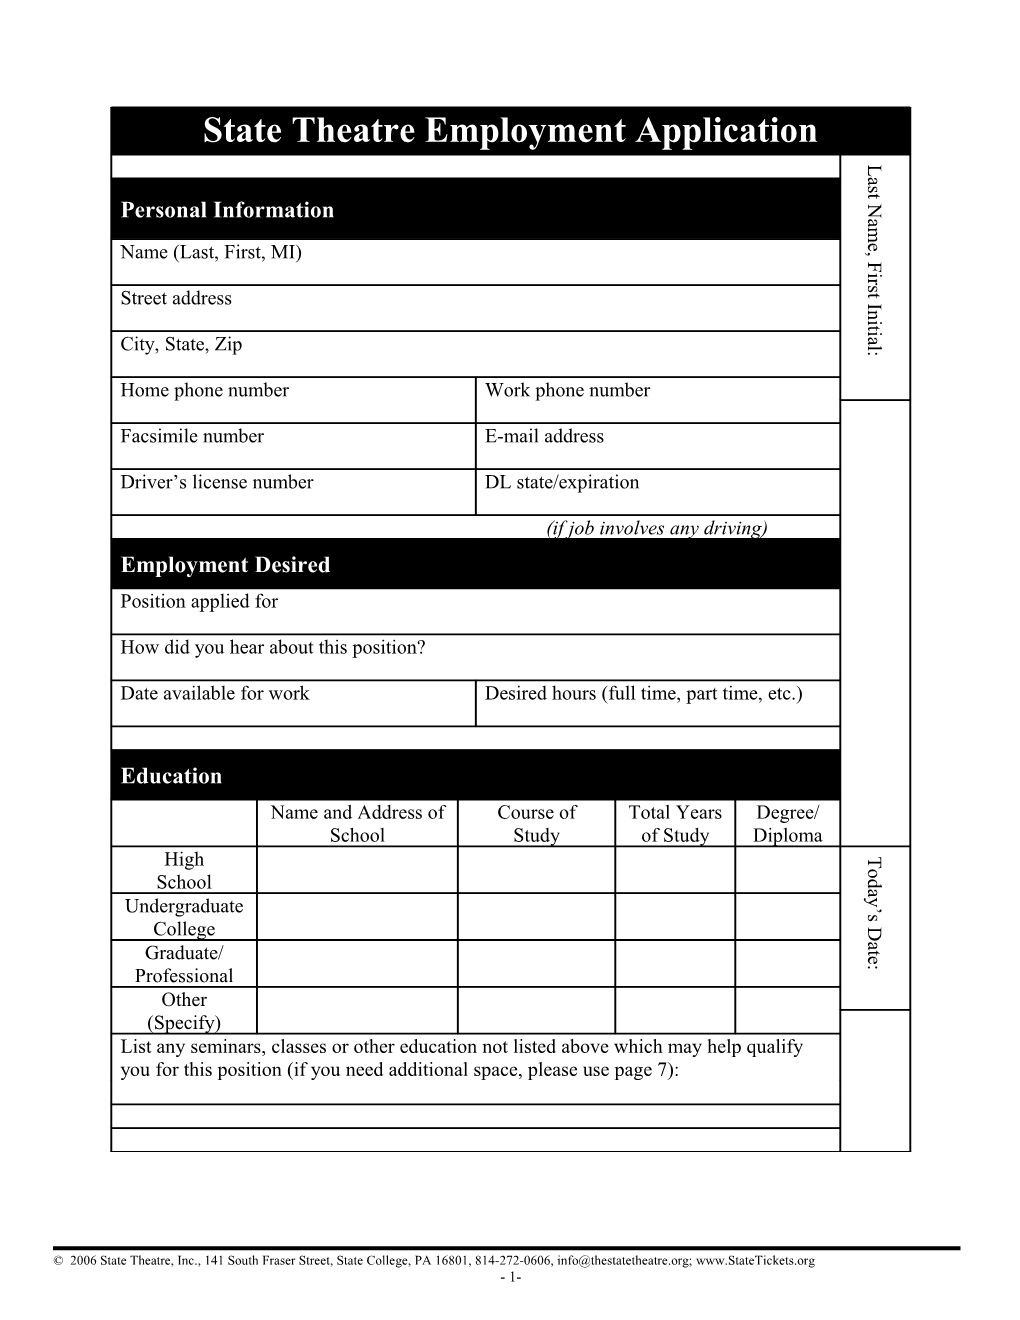 State Theatre Employment Application